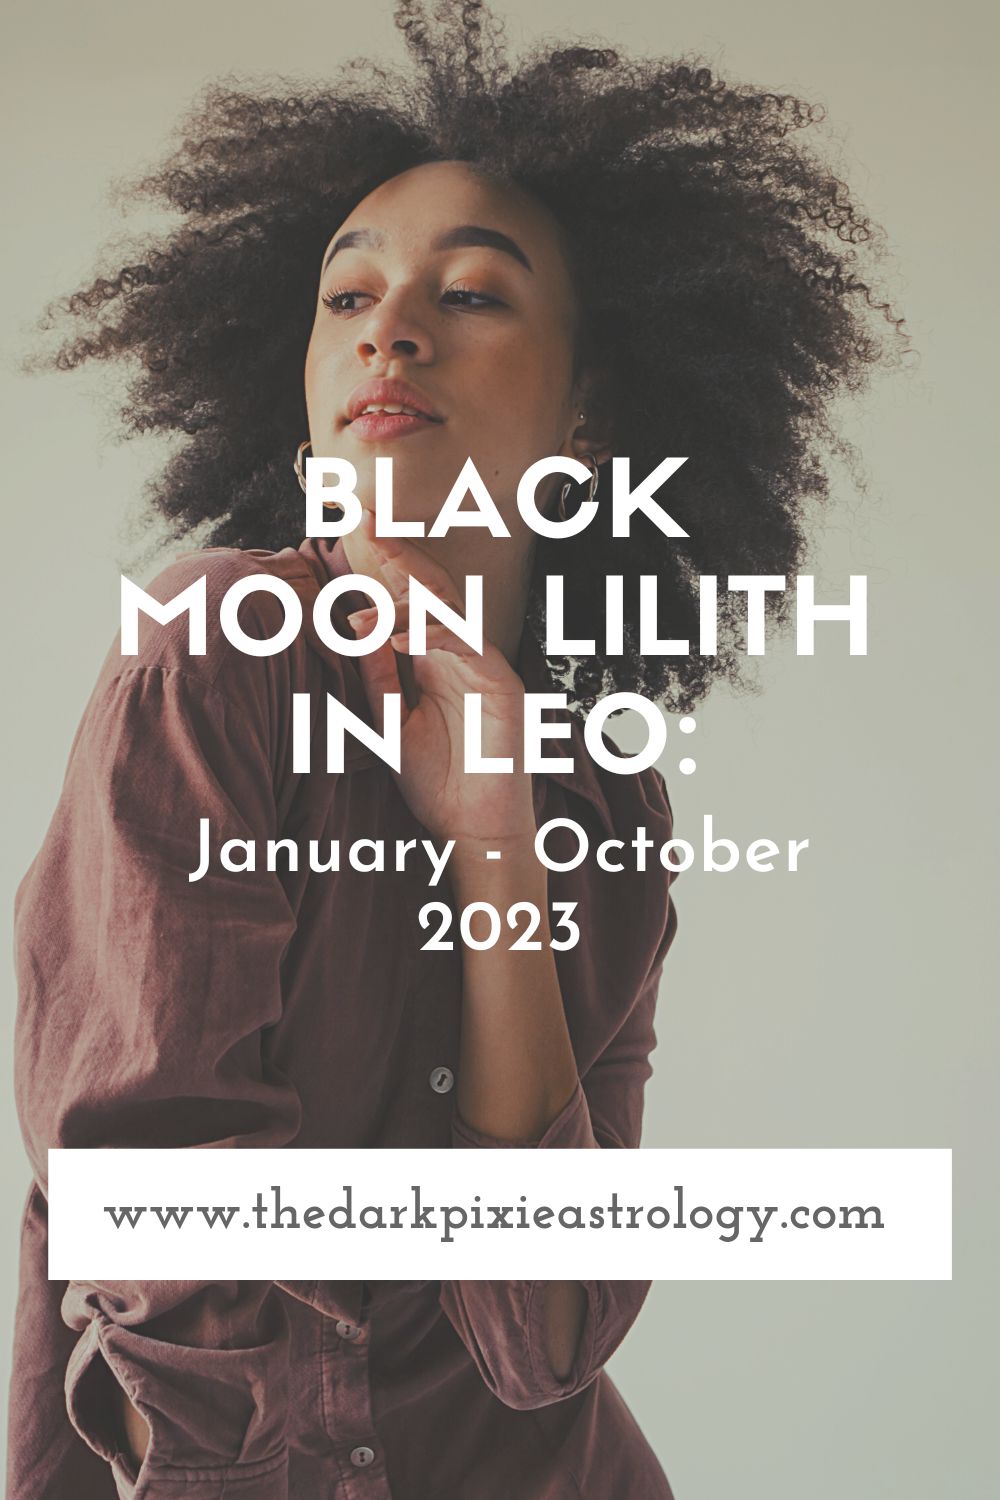 Black Moon Lilith in Leo: January - October 2023 - The Dark Pixie Astrology